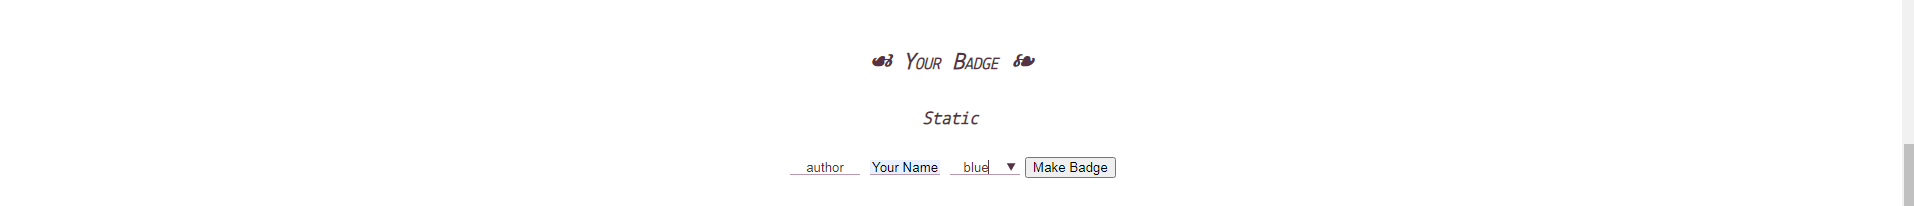 How to make custom language badges for your profile using shields.io, by  Tassia Accioly